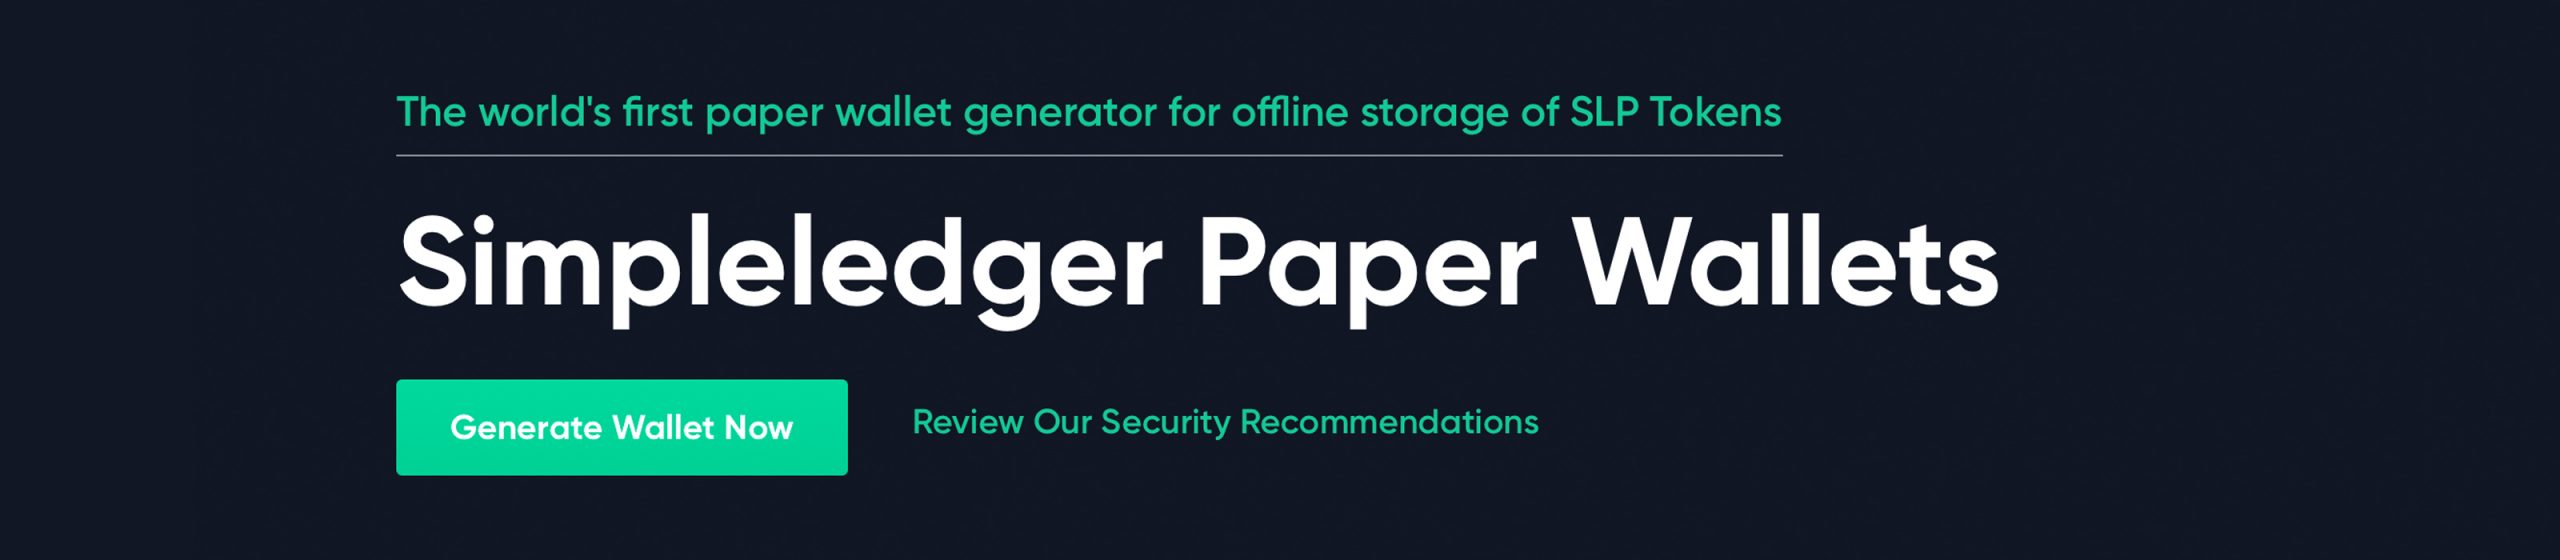 Cold Storage and Bearer Bonds: How to Print an SLP Token Paper Wallet  1